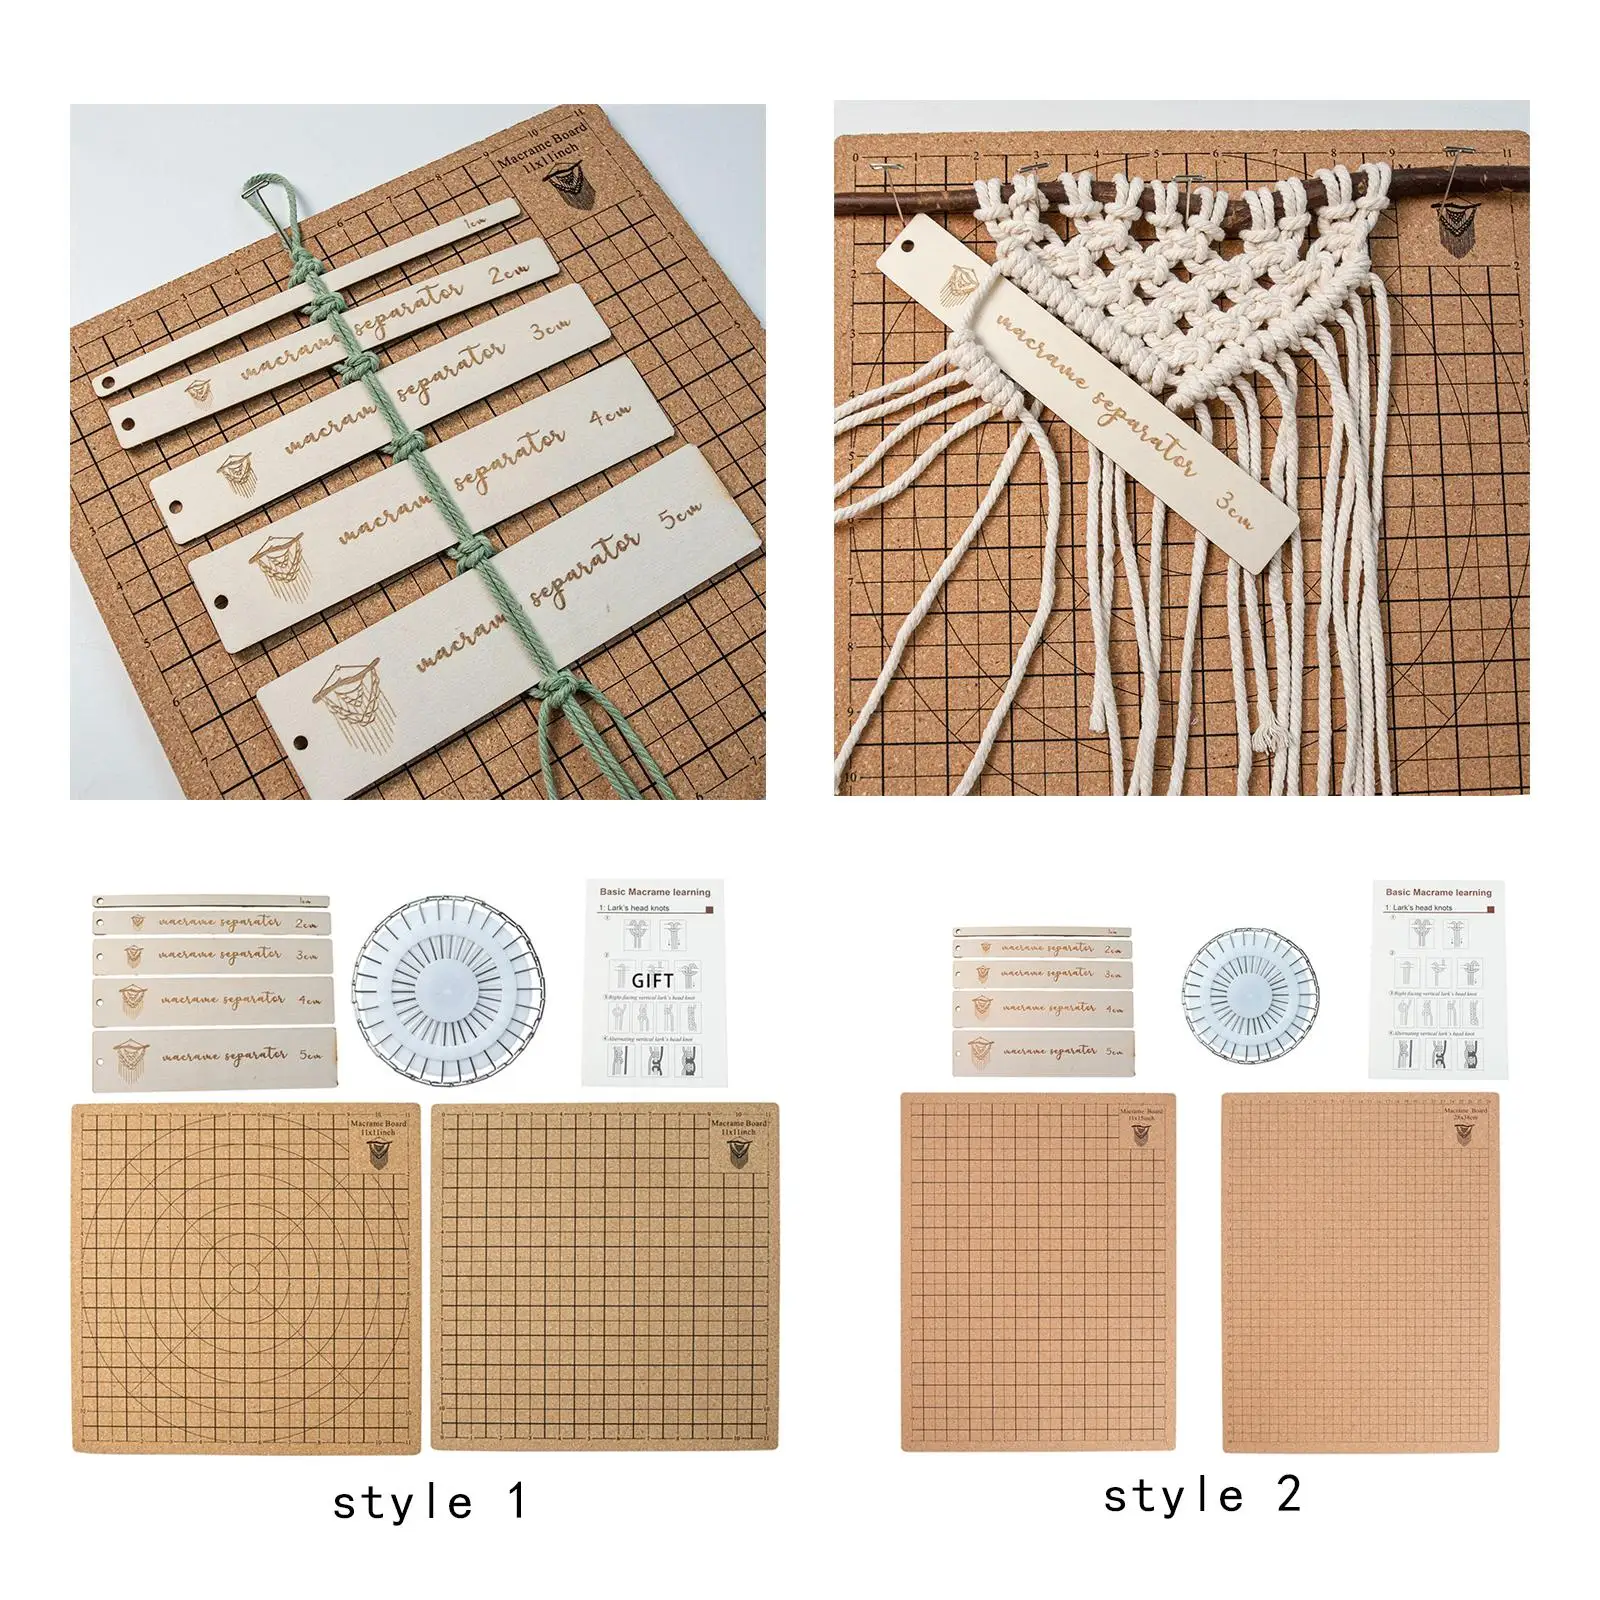 Macrame Board Practical Lightweight Macrame Knot Auxiliary Ruler Braiding Plate for Weaving Knitting Crocheting Measuring Tools